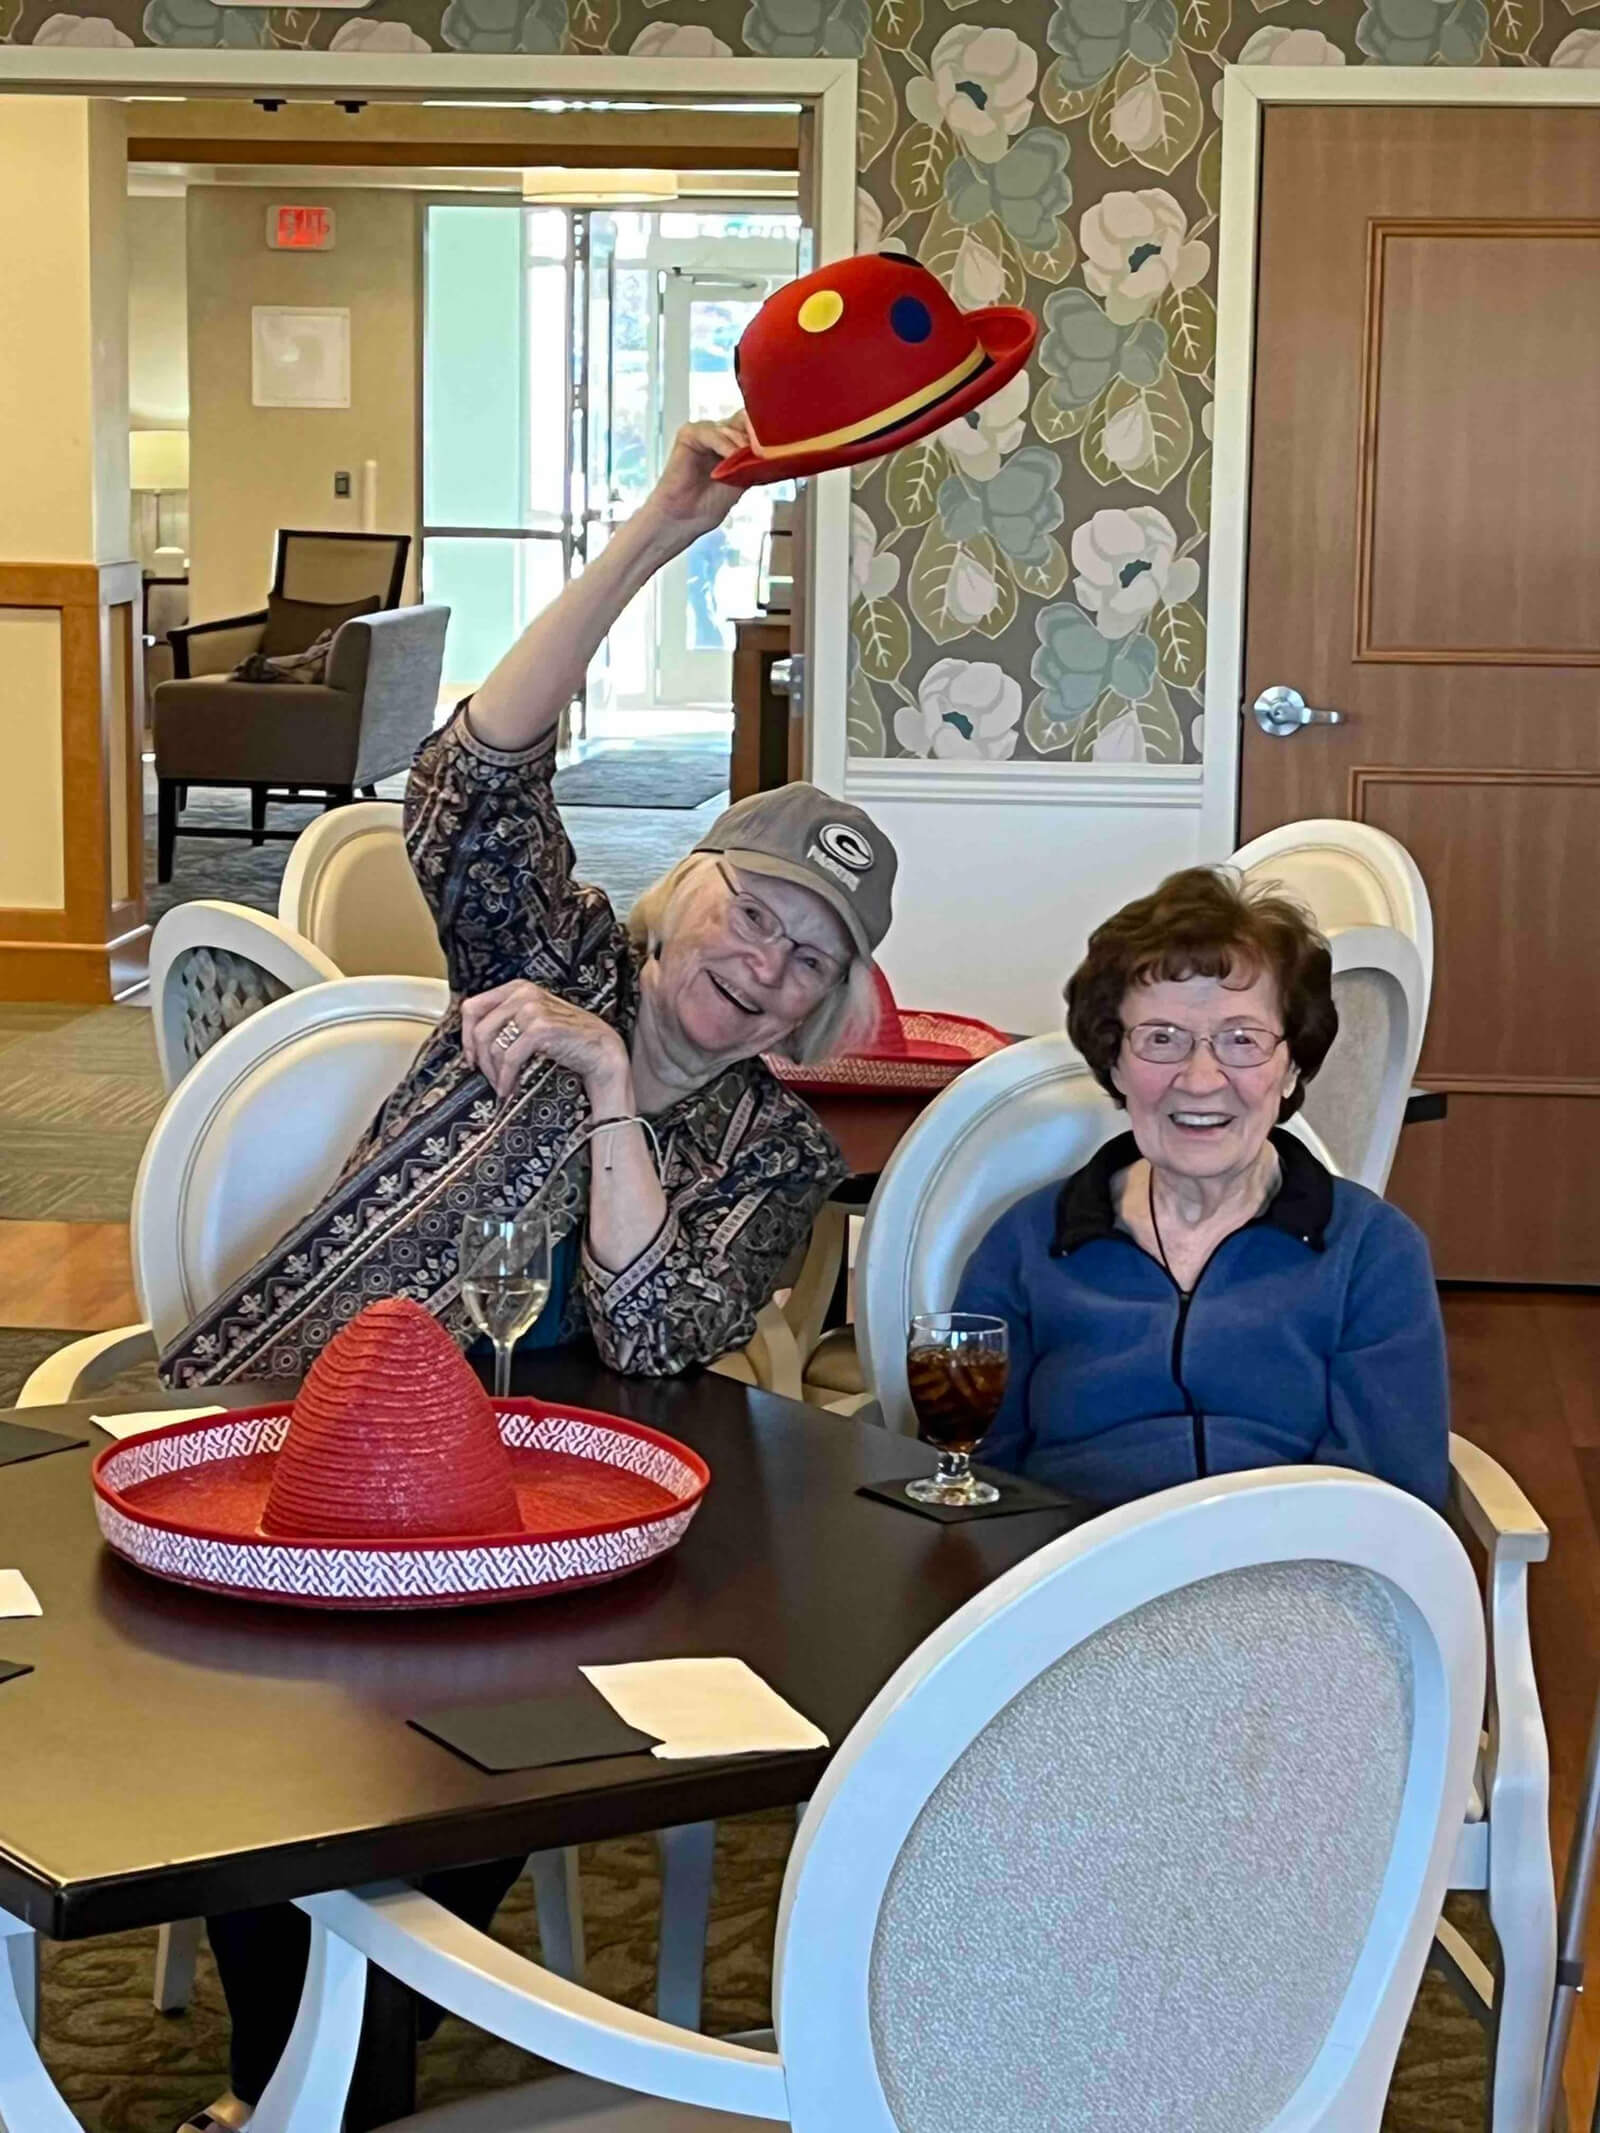 A senior resident playfully tipping a whimsical hat during a social event at The Waters of Oakdale, showcasing the joyful community atmosphere.